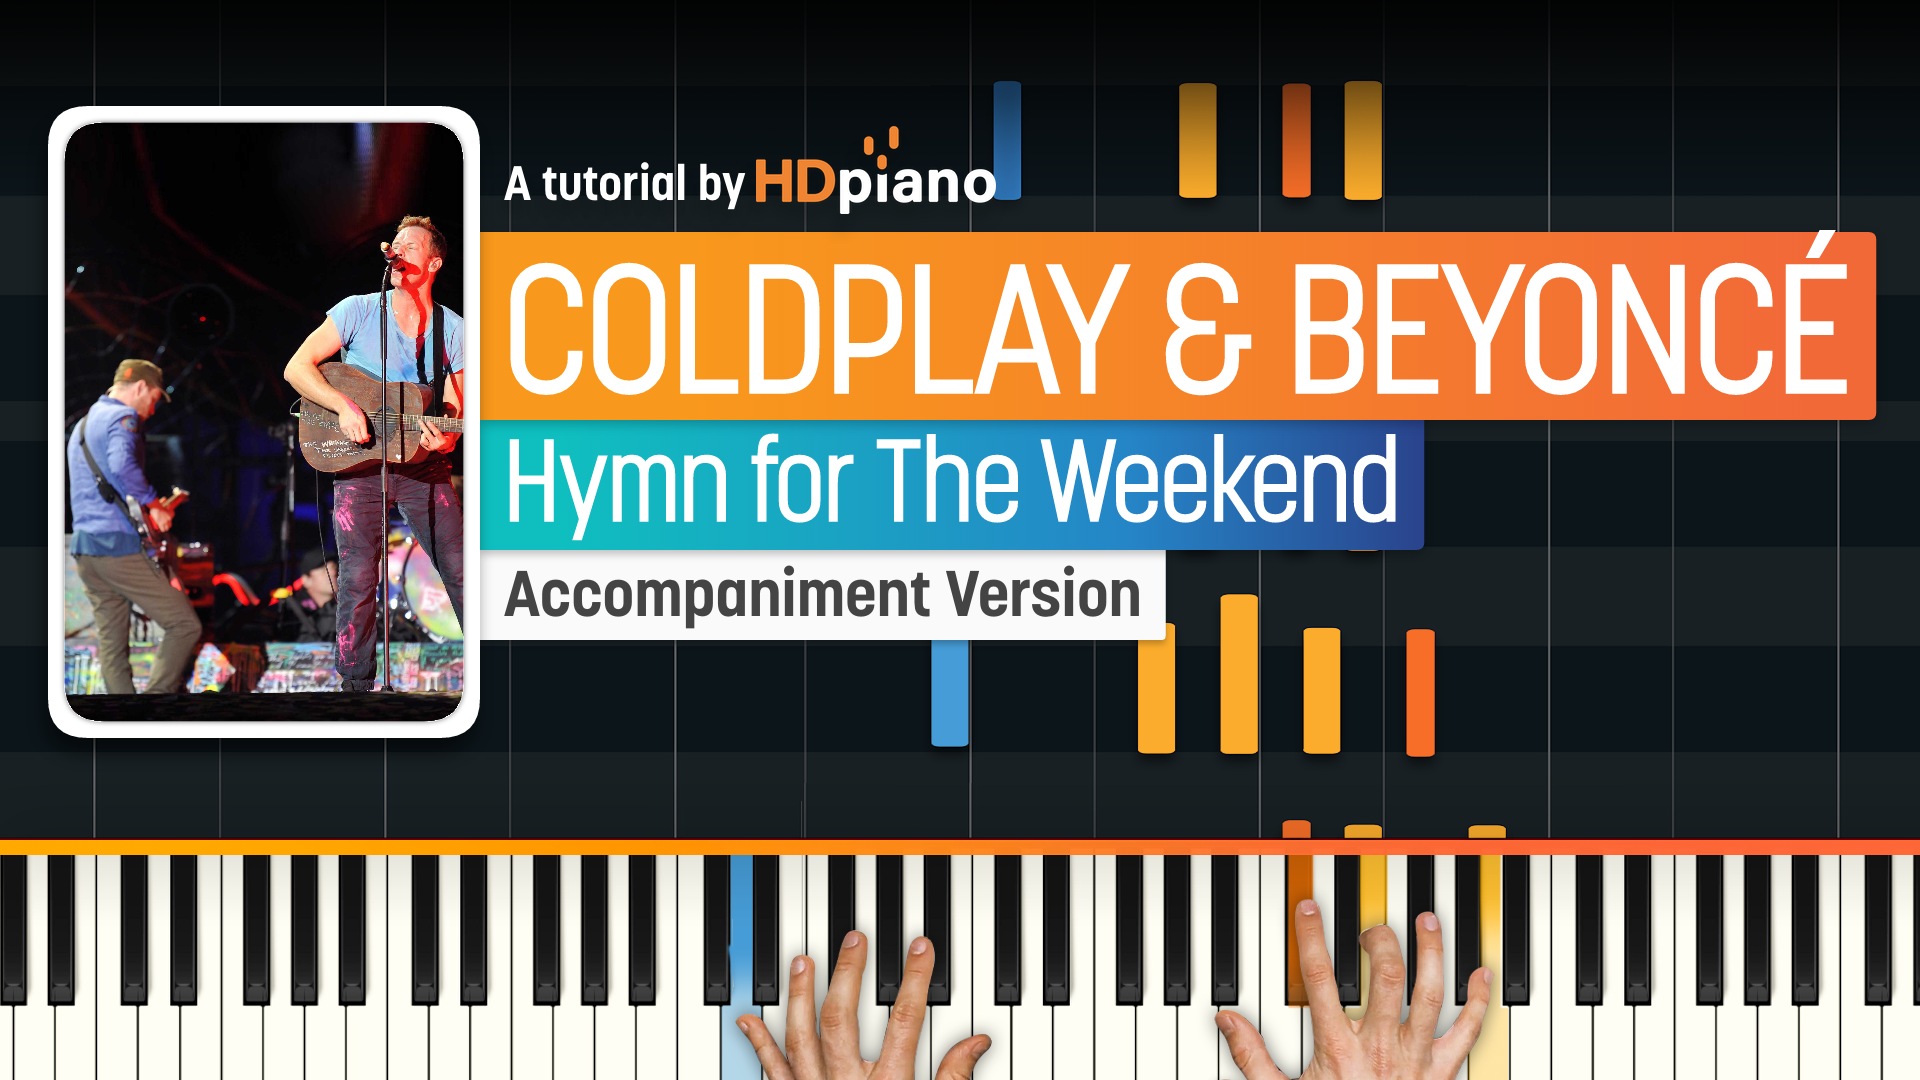 Hymn for The Weekend – HDpiano